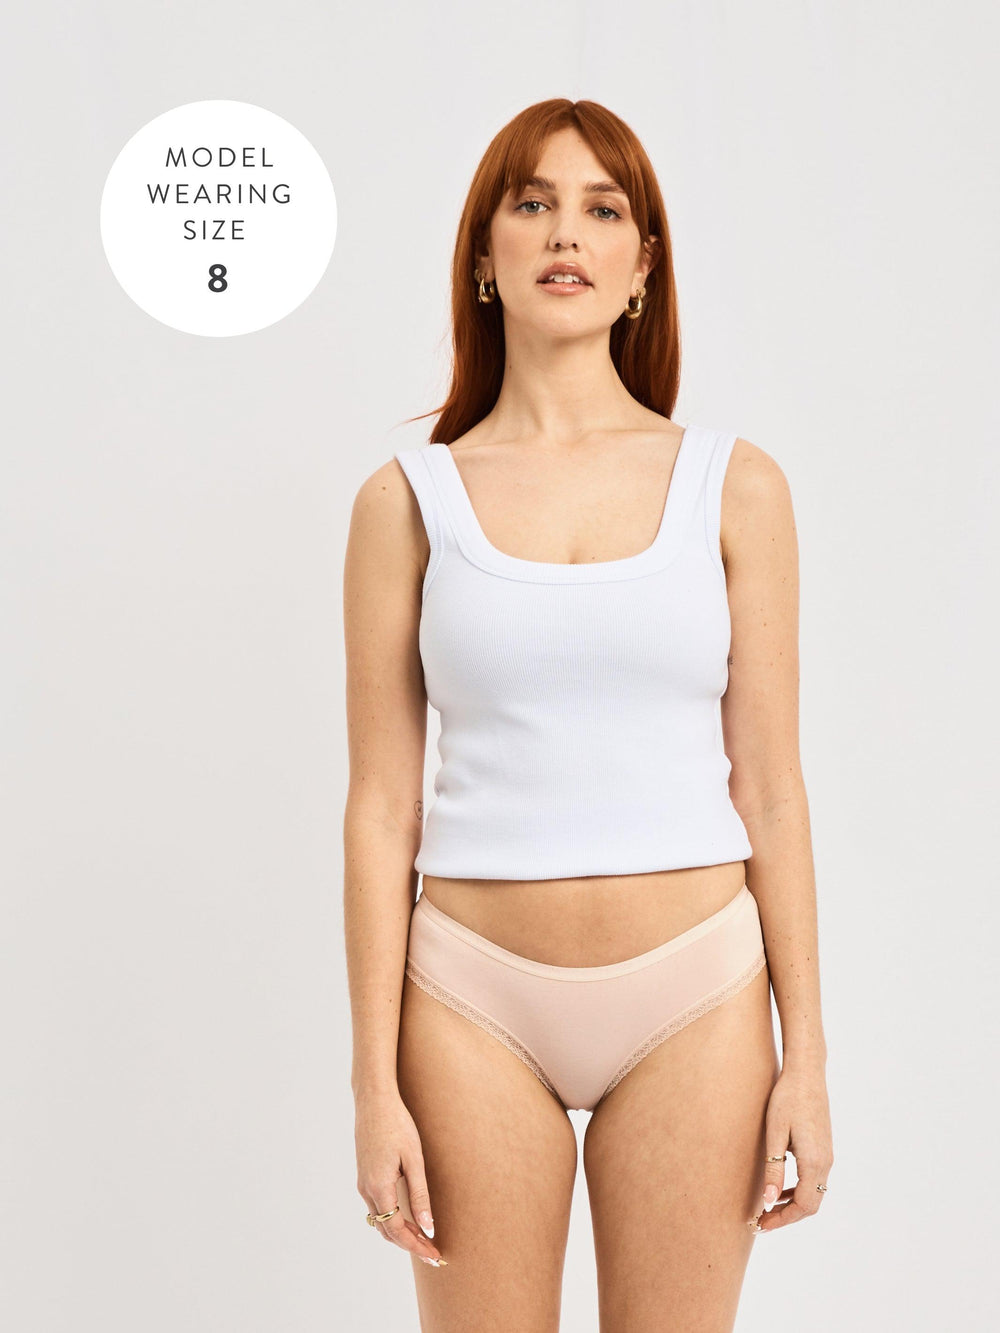 The Game-Changing 100% Bamboo Viscose Undies That Have Taken Australia By  Storm! - Sustain Health Magazine